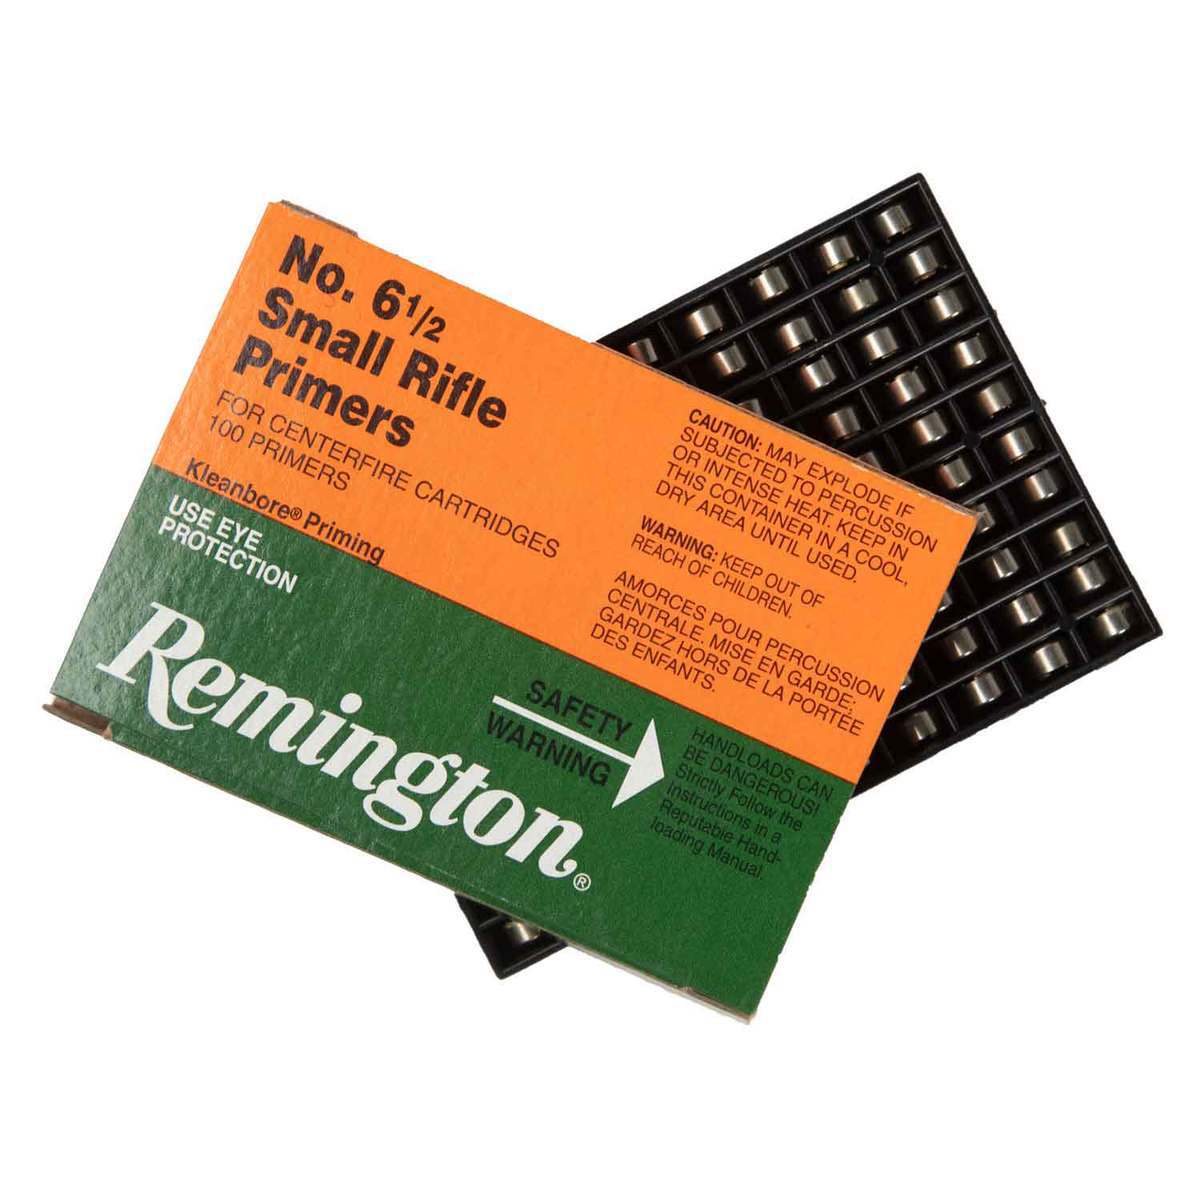 Remington #6-1/2 Small Rifle Primers - 100 Count - Small Rifle | Sportsman's Warehouse